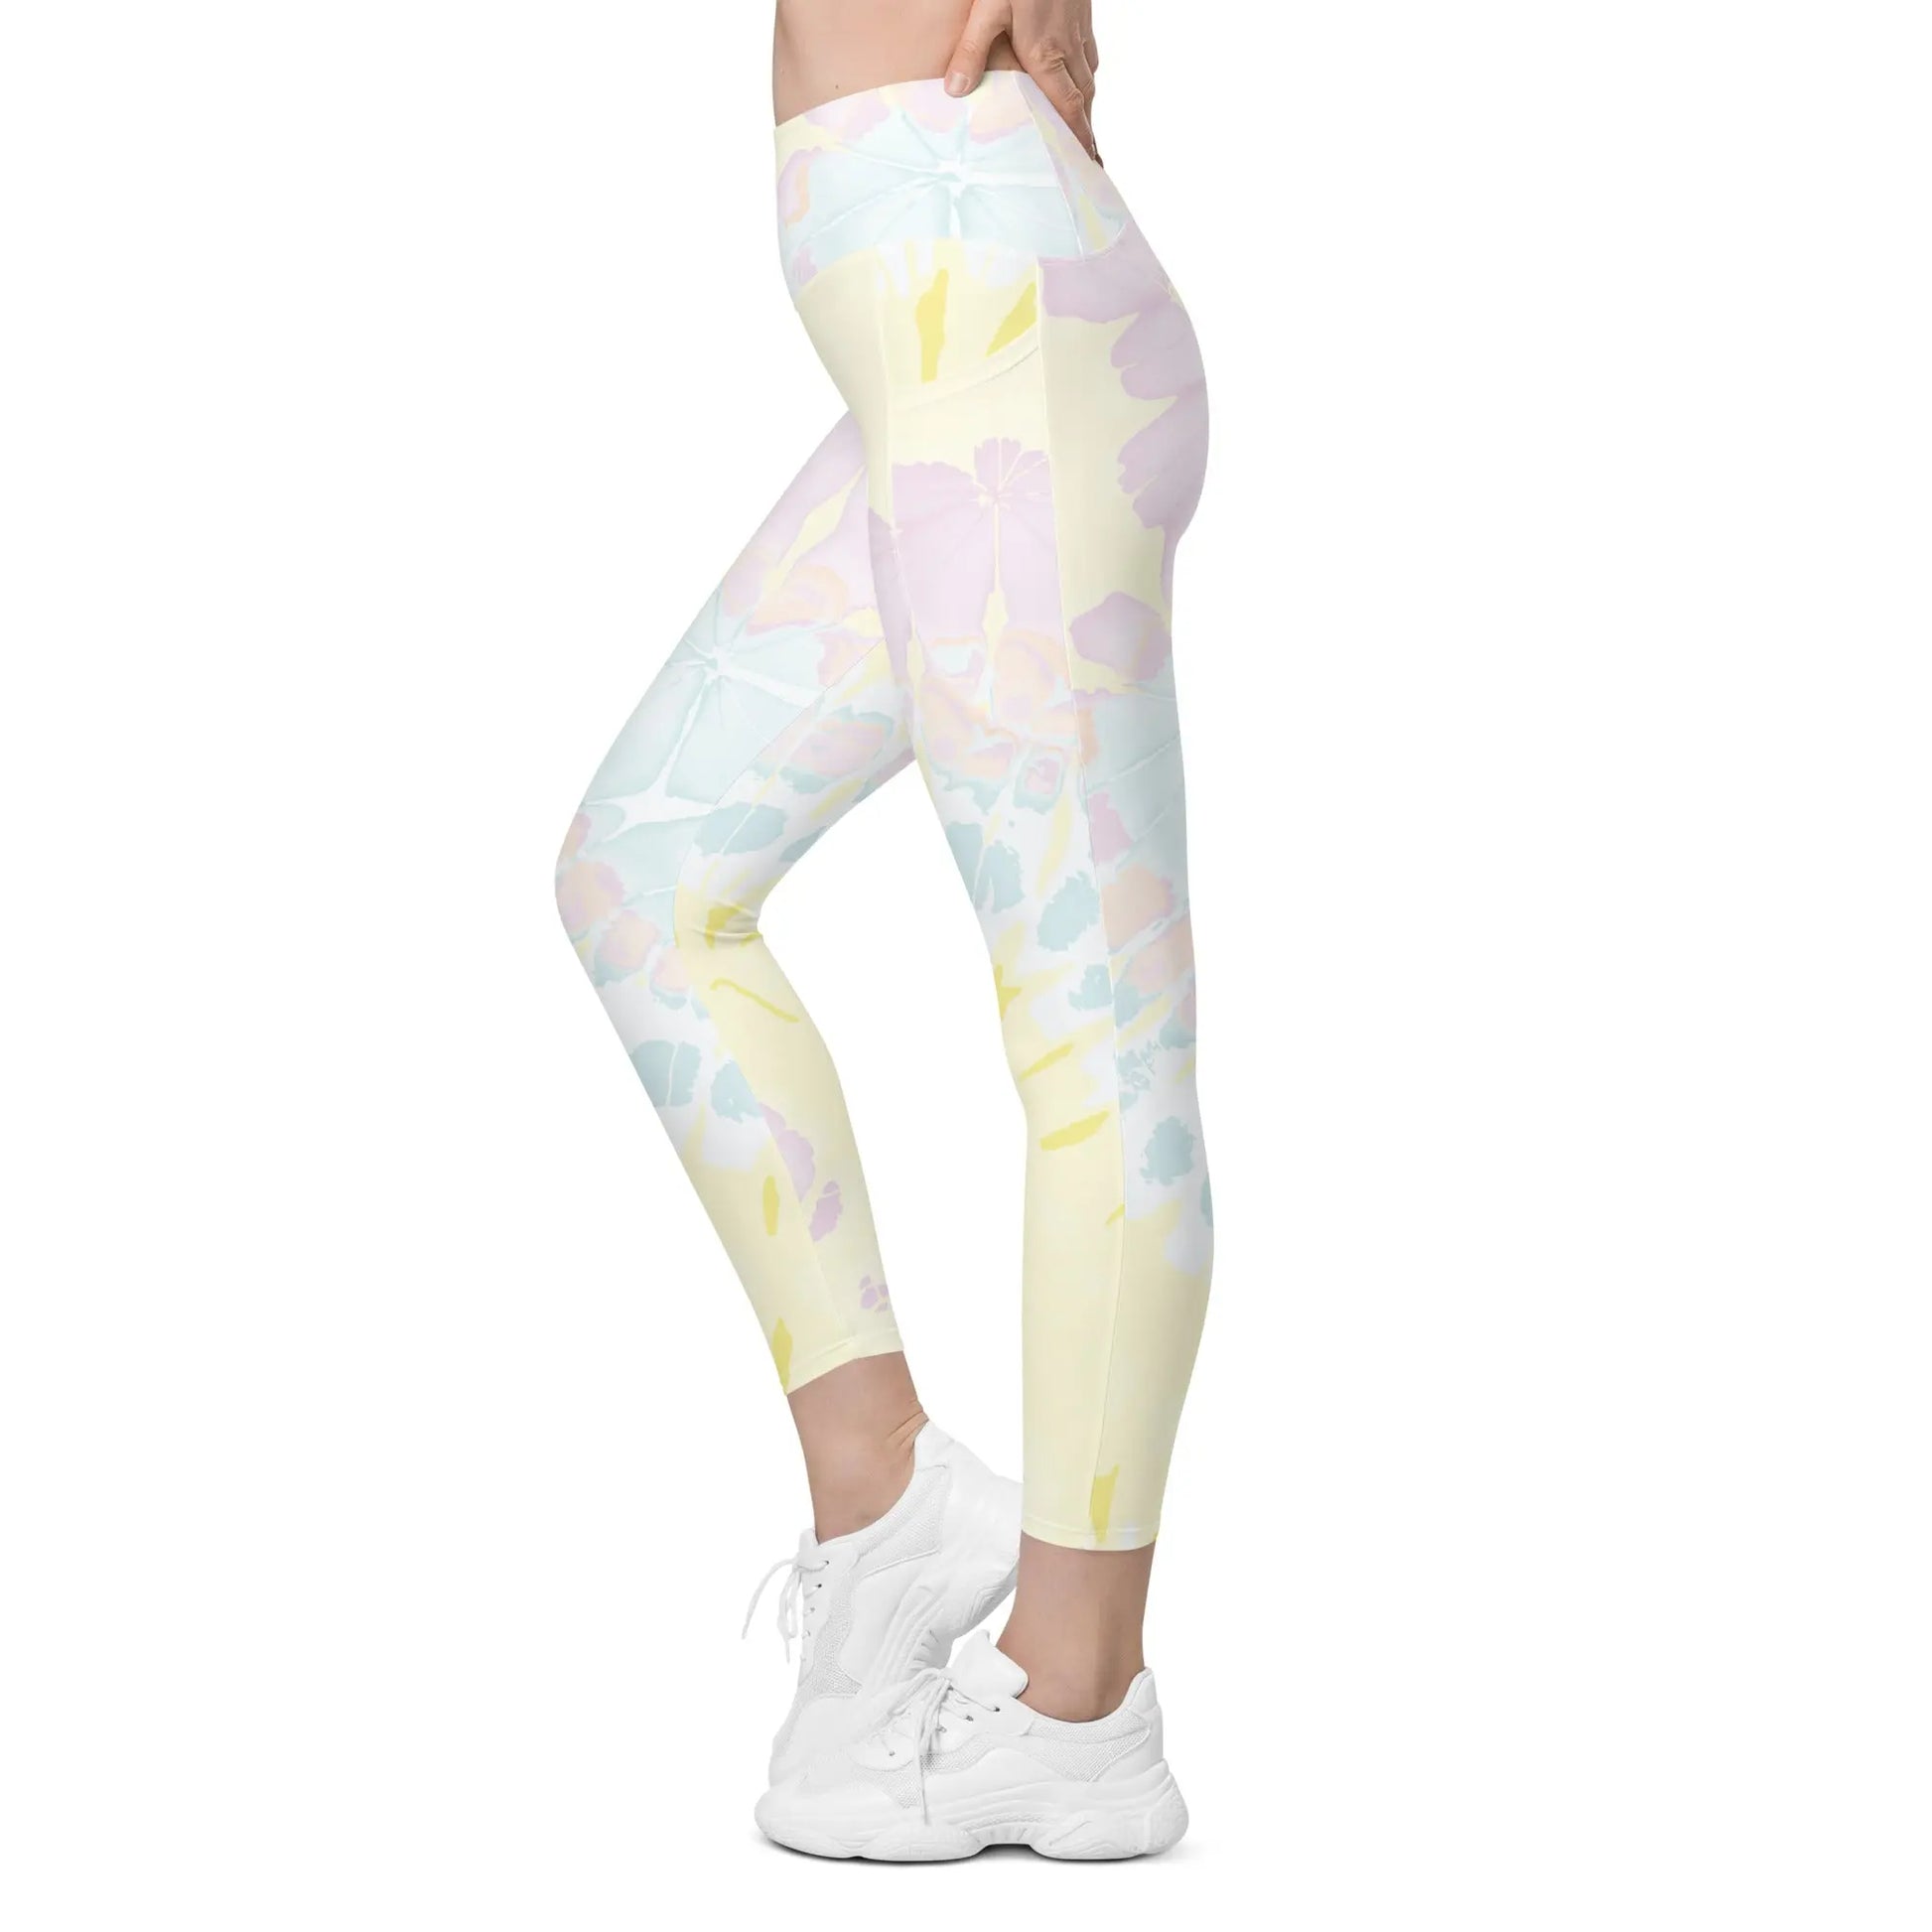 Softest.Recycled.Fabric.Printed.Leggings.with.Pockets.High.Waist.side.view